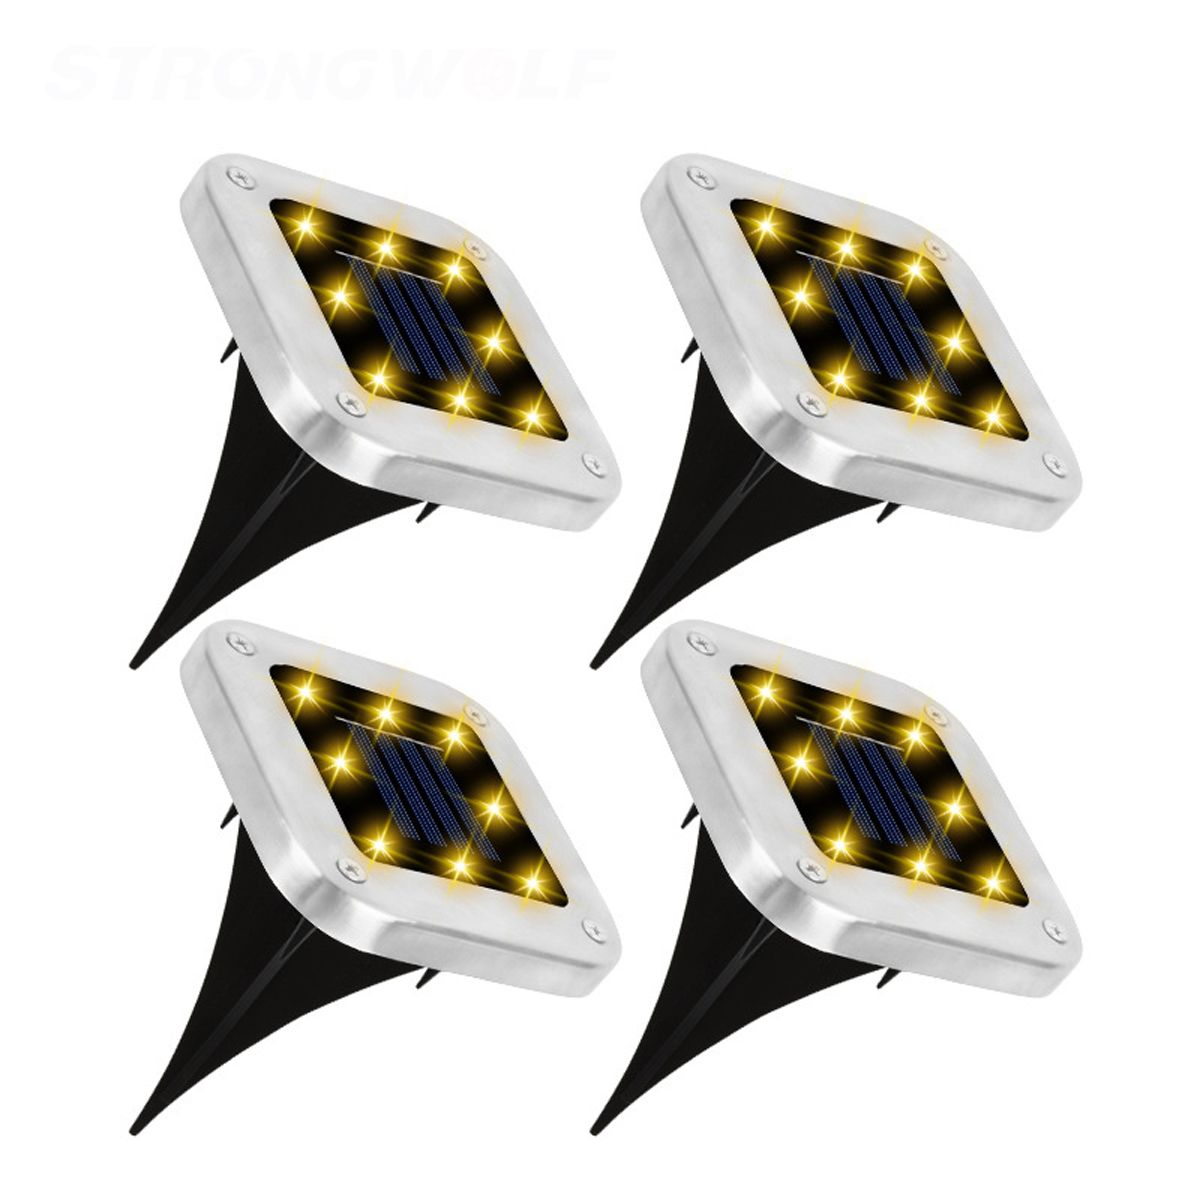 4PCS-Solar-Powered-LED-Lawn-Light-Square-Buried-Inground-Recessed-Lamp-for-Garden-Outdoor-Deck-Path-1690068